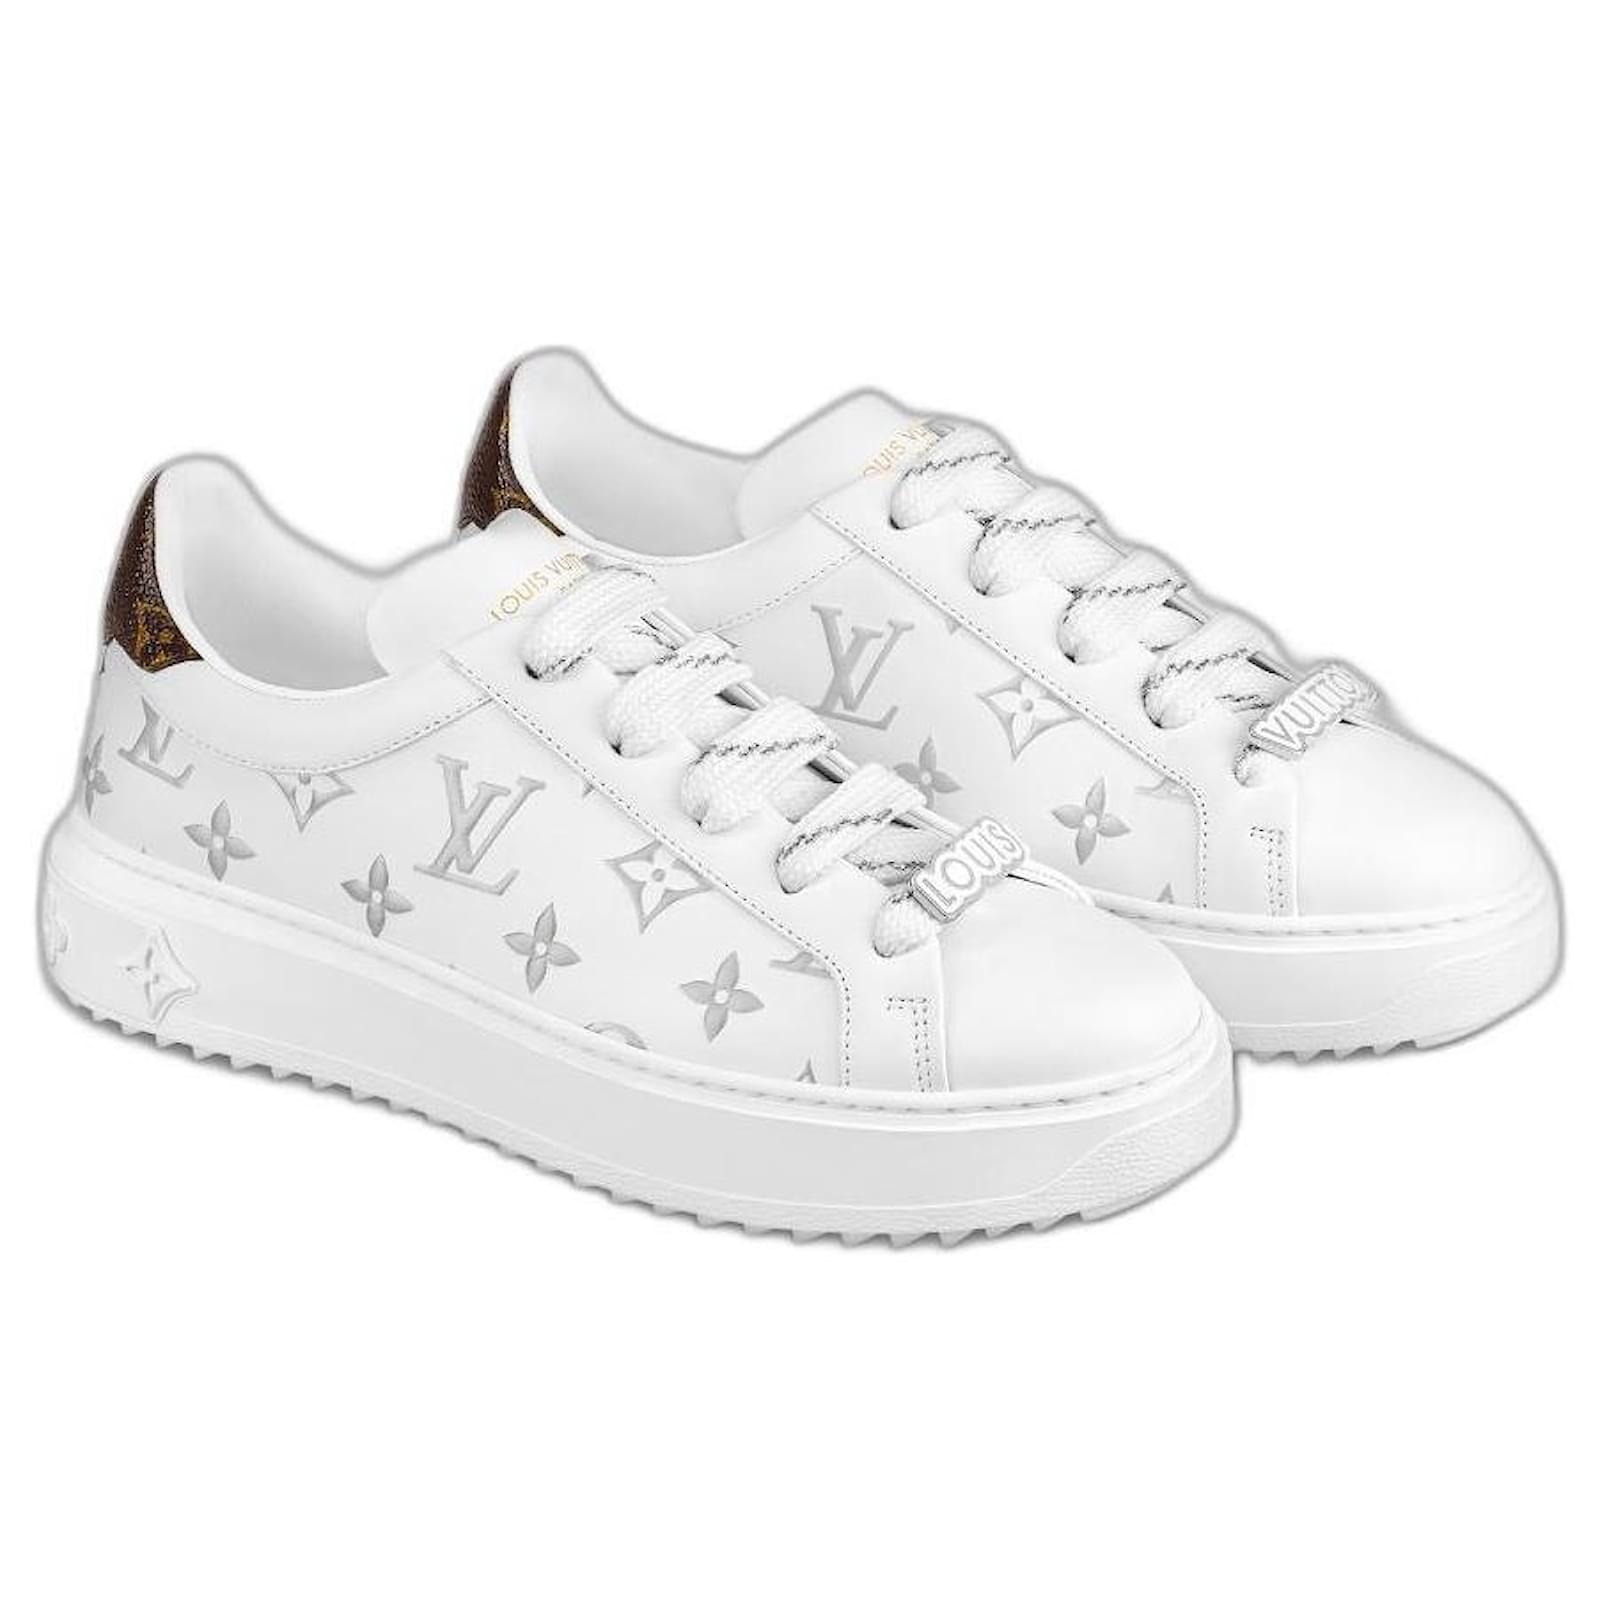 Shop Louis Vuitton Time out sneaker (SNEAKER TIME OUT, 1AAP6J 1AAP6L 1AAP6N  1AAP6O, 1AAP69 1AAP6B 1AAP6D 1AAP6F 1AAP6H) by Mikrie